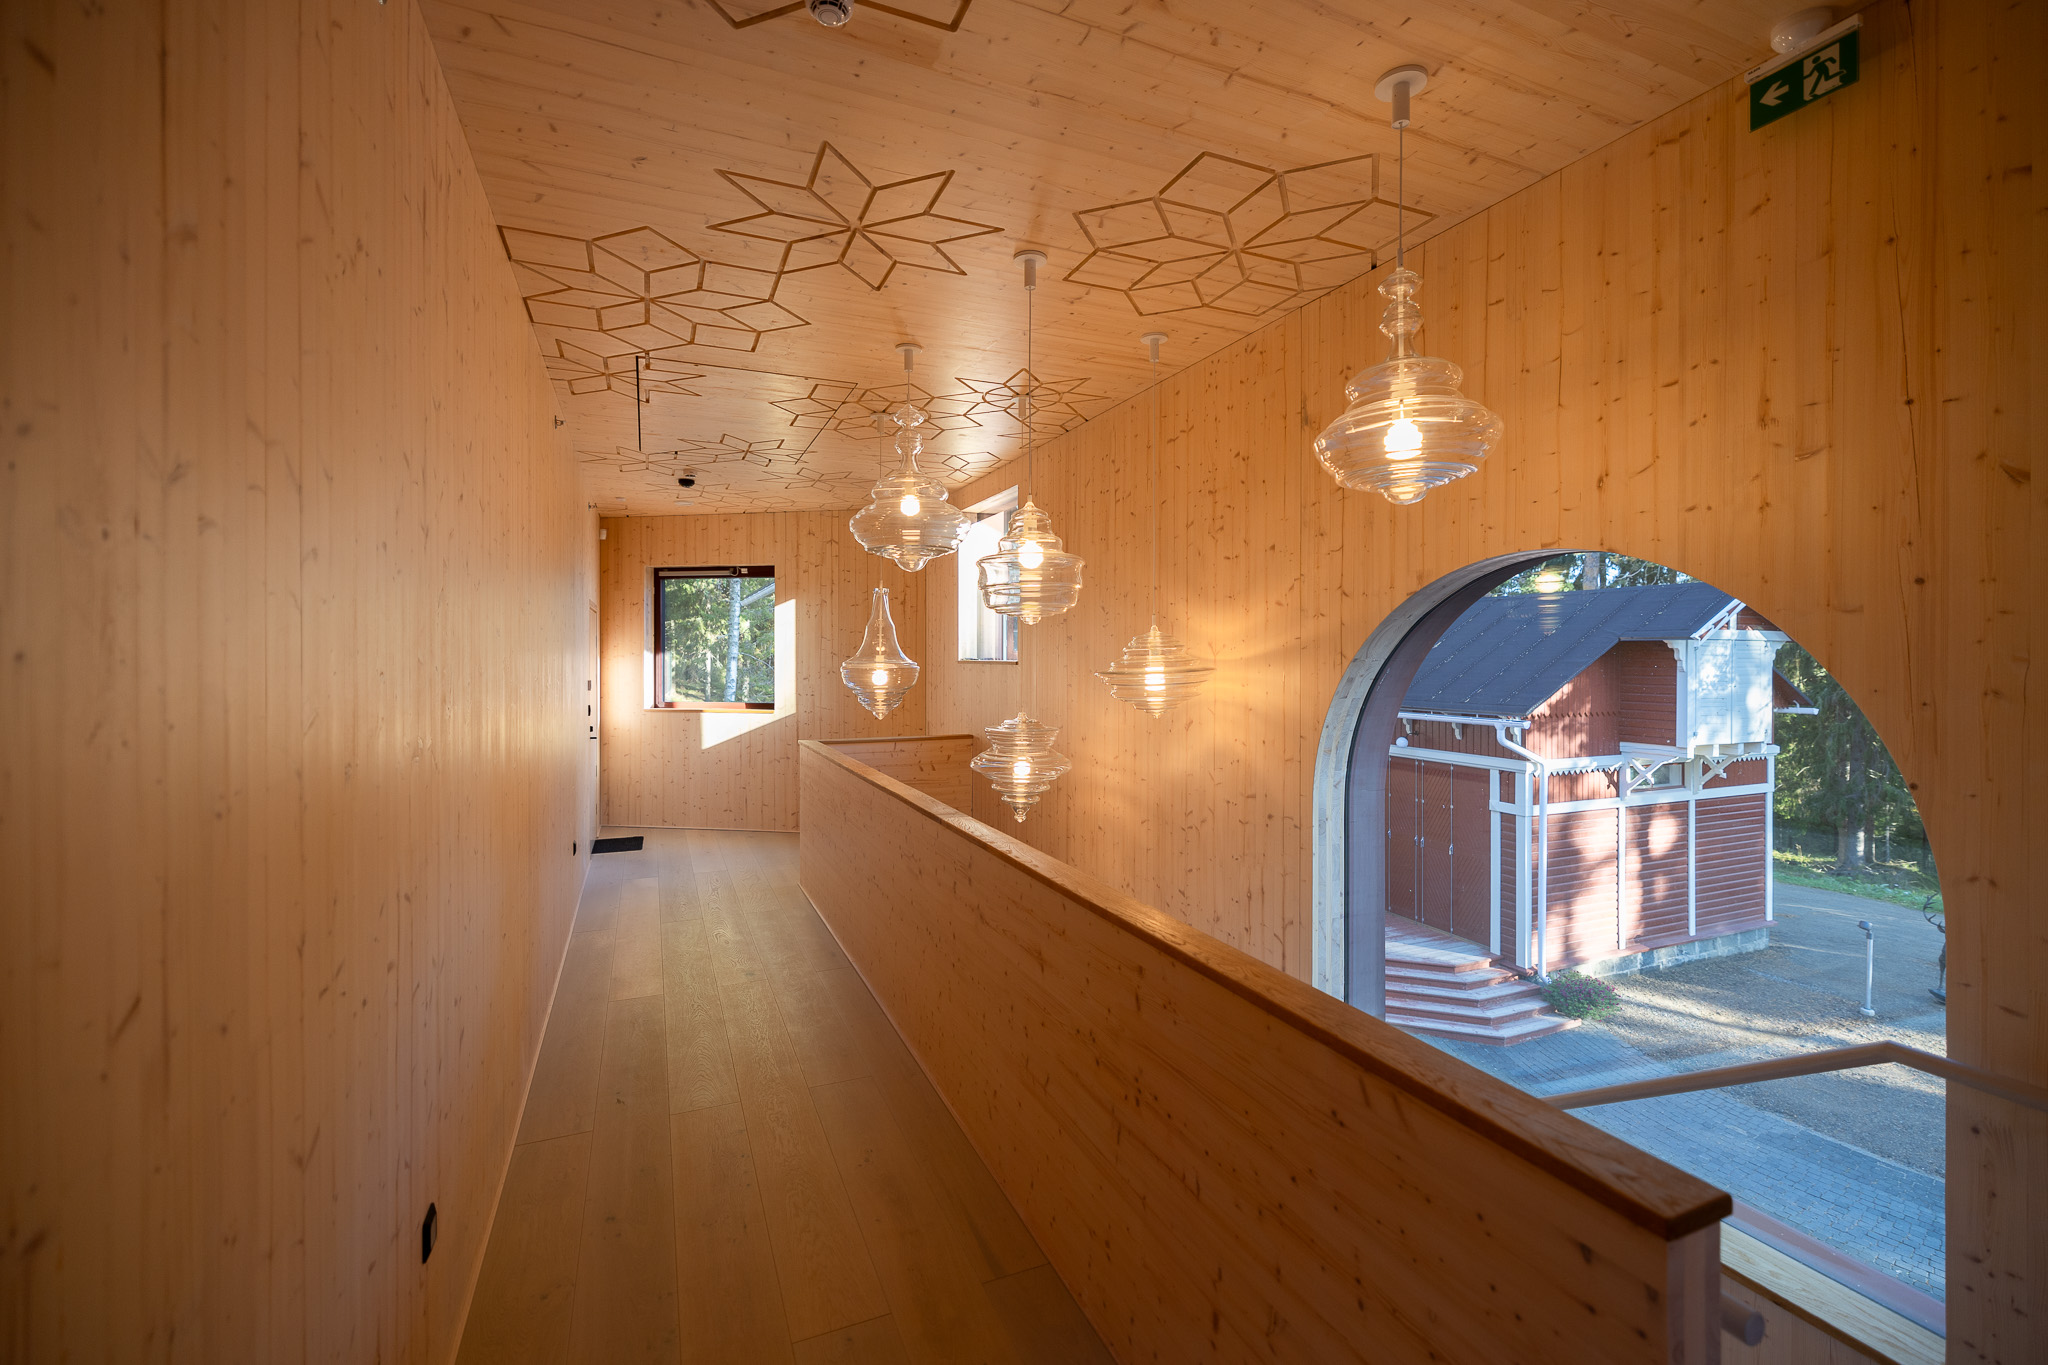 Wood is strongly present also in the interiors of the new guest house, Käenpoika